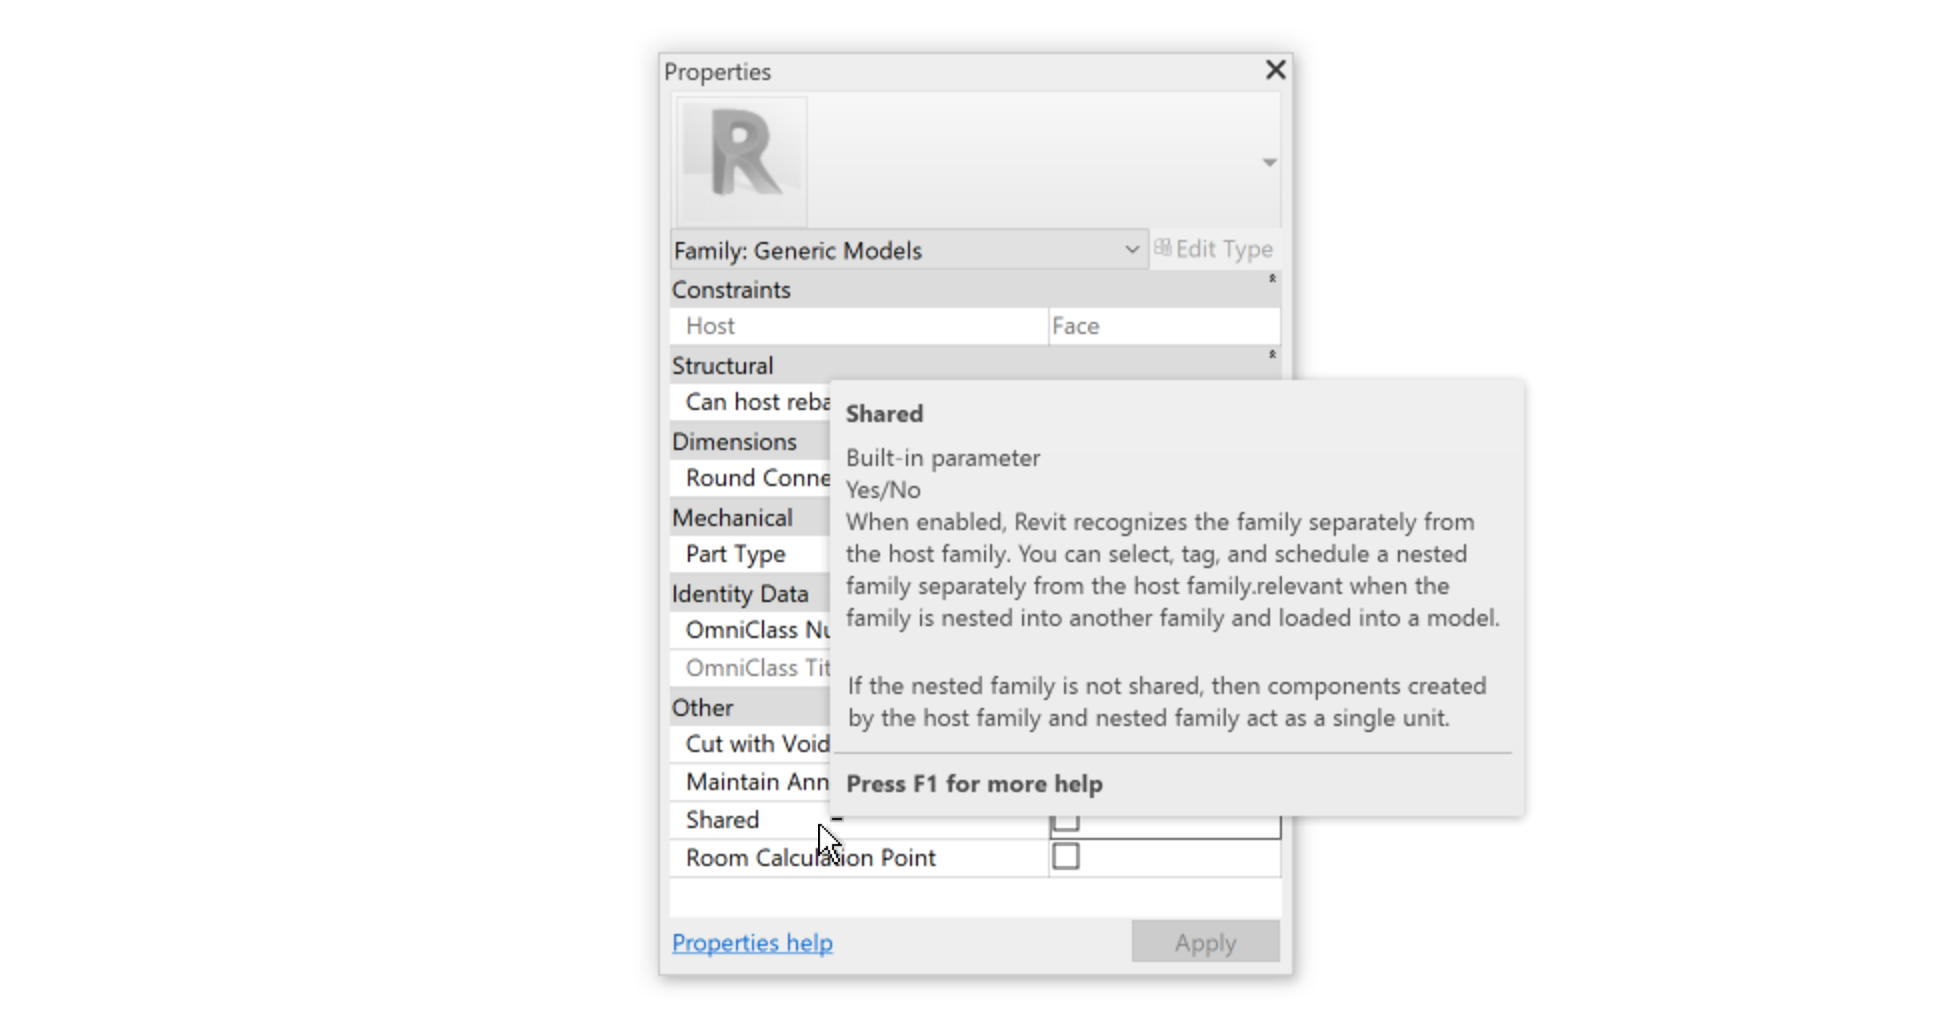 Revit families can be set to be shared in the properties dialog.